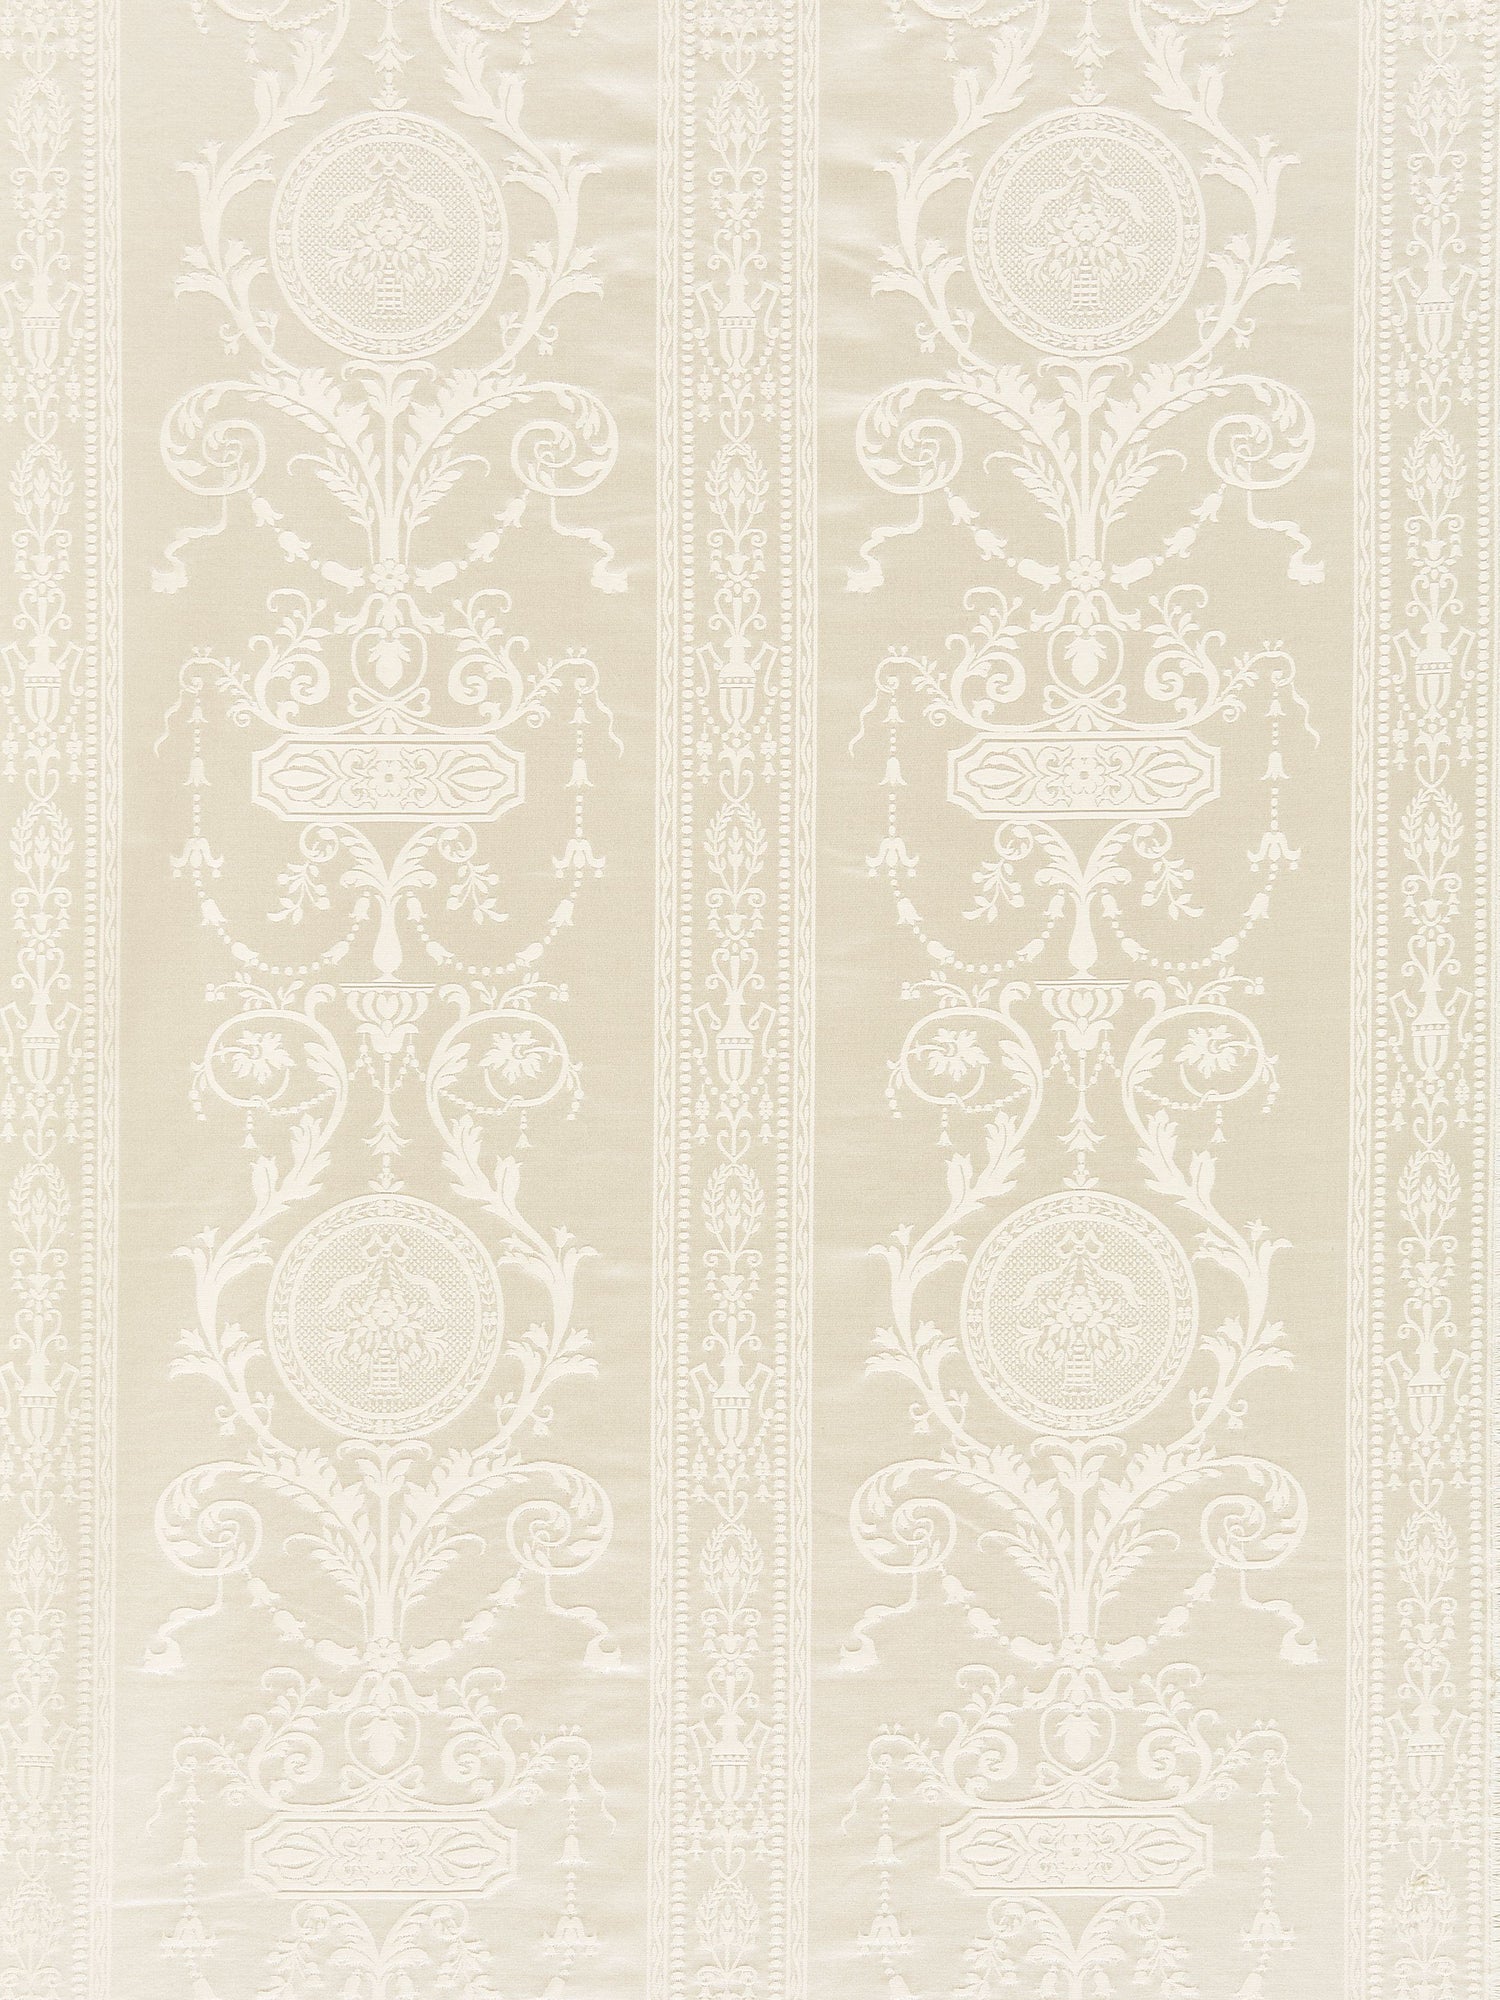 Hepplewhite fabric in ivory color - pattern number SC 0001516MM - by Scalamandre in the Scalamandre Fabrics Book 1 collection